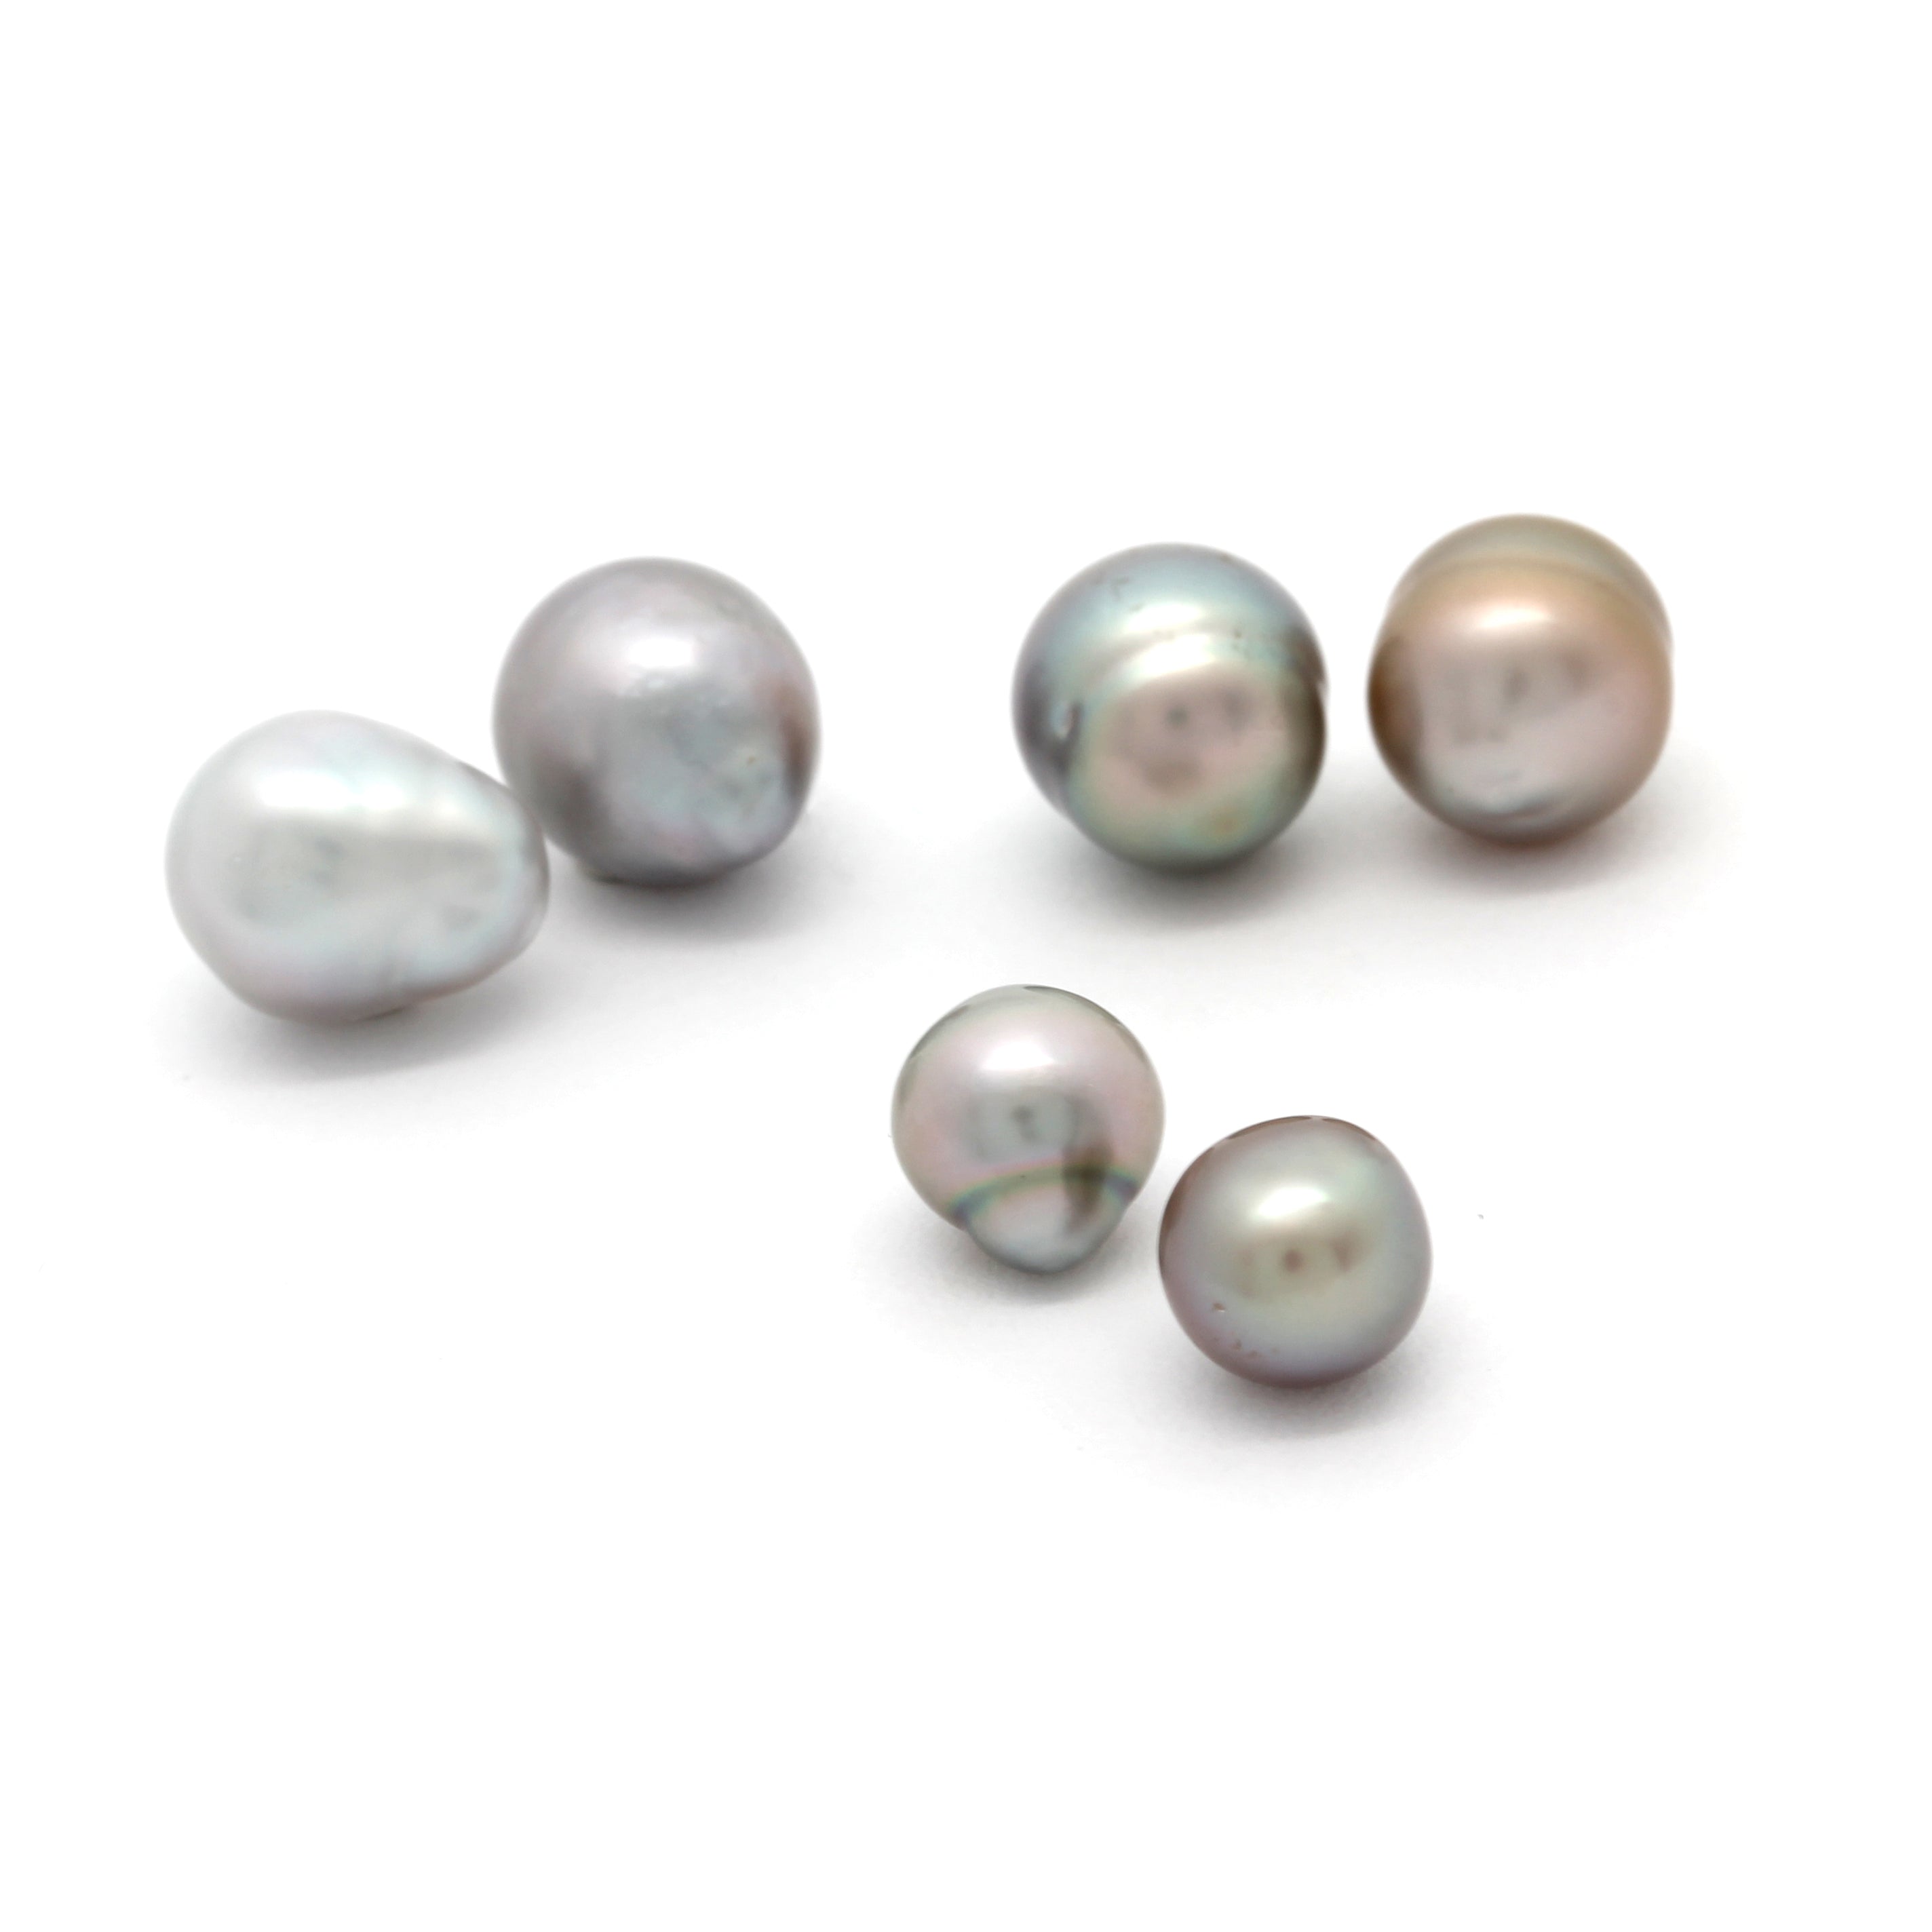 Lot of 6 Baroque Cortez Pearls from 2020 HARVEST